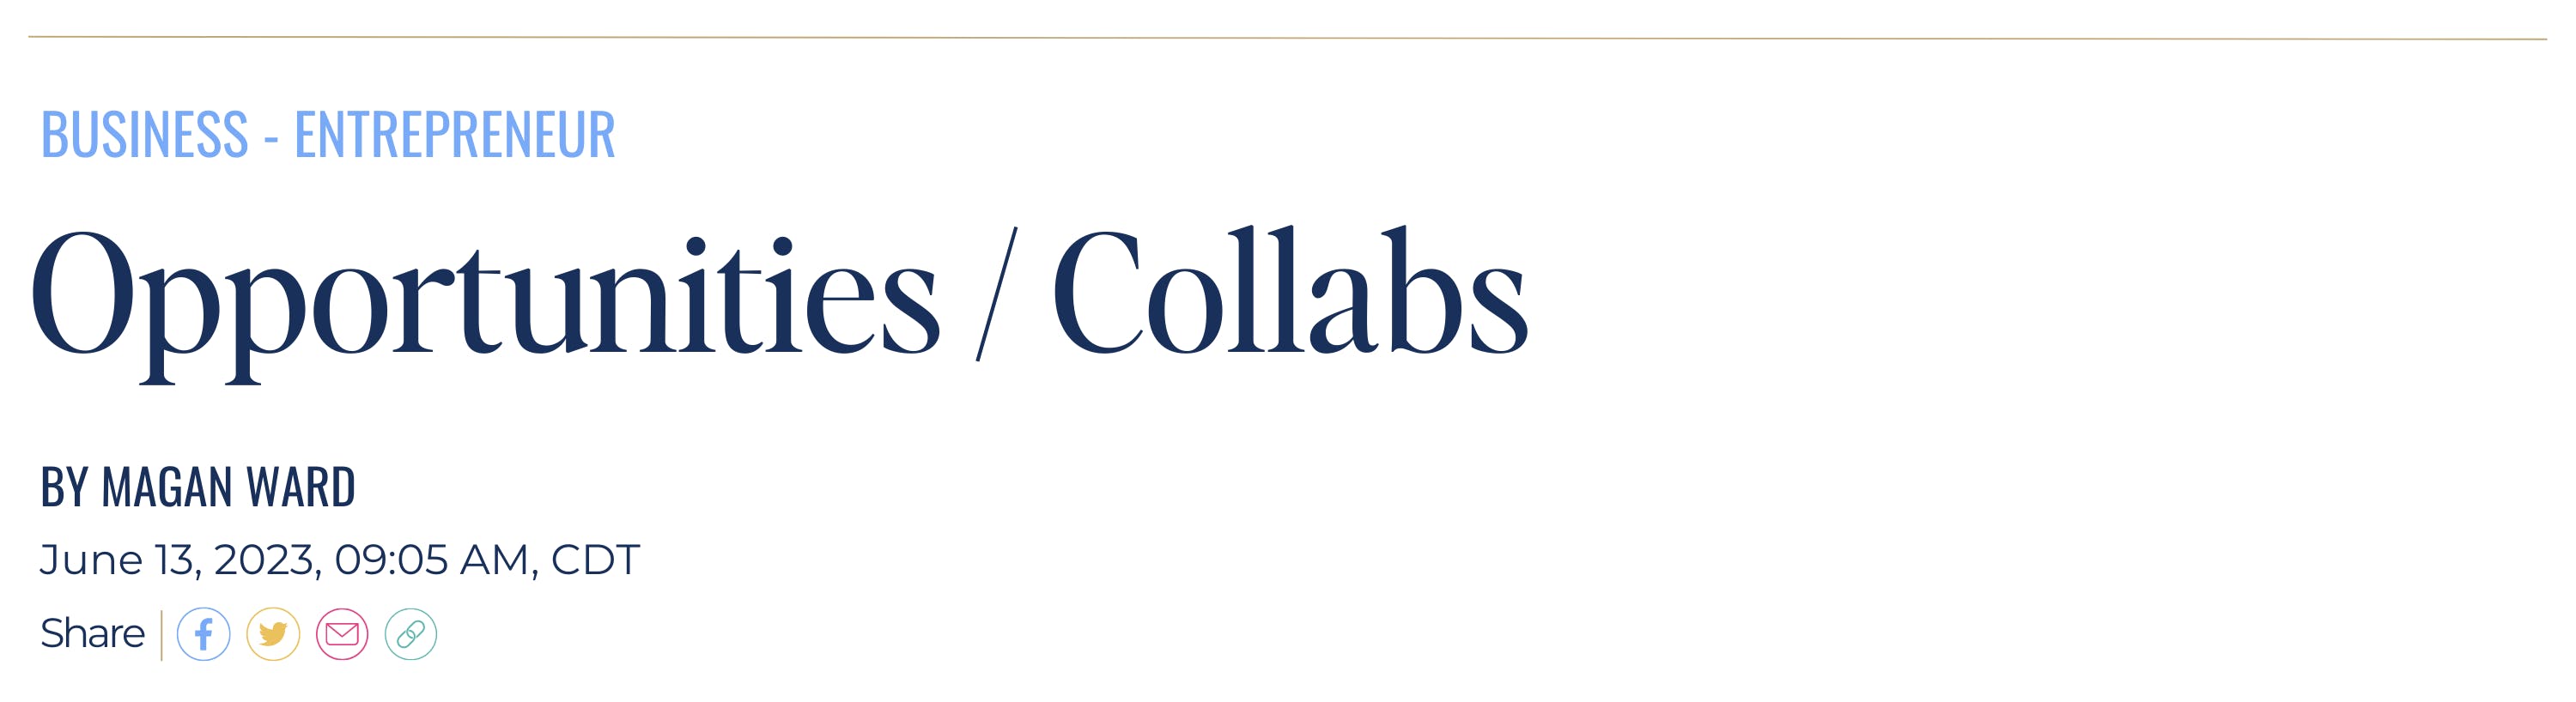 banner image that reads "Opportunities / Collabs"